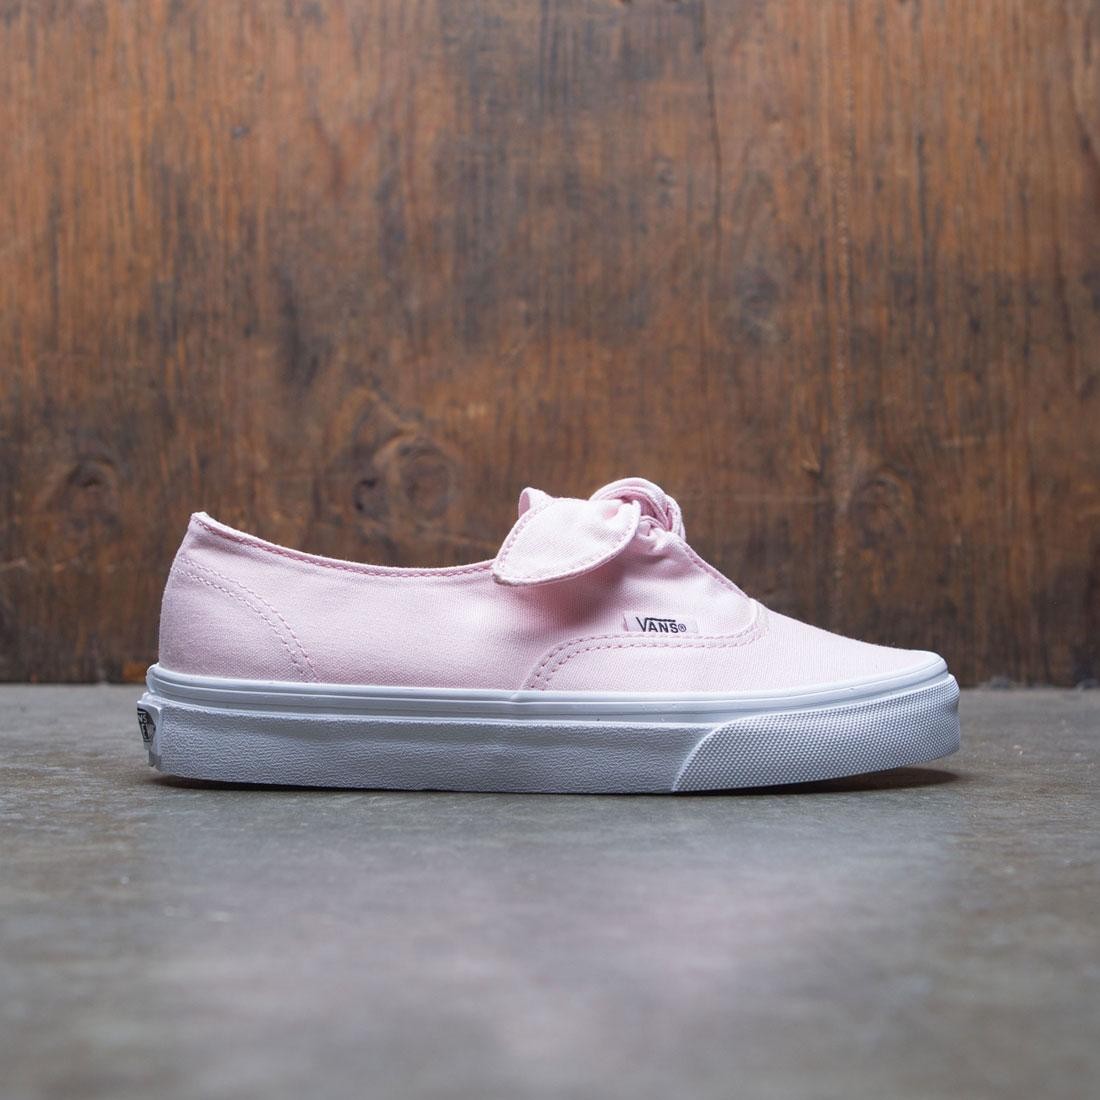 vans knotted pink